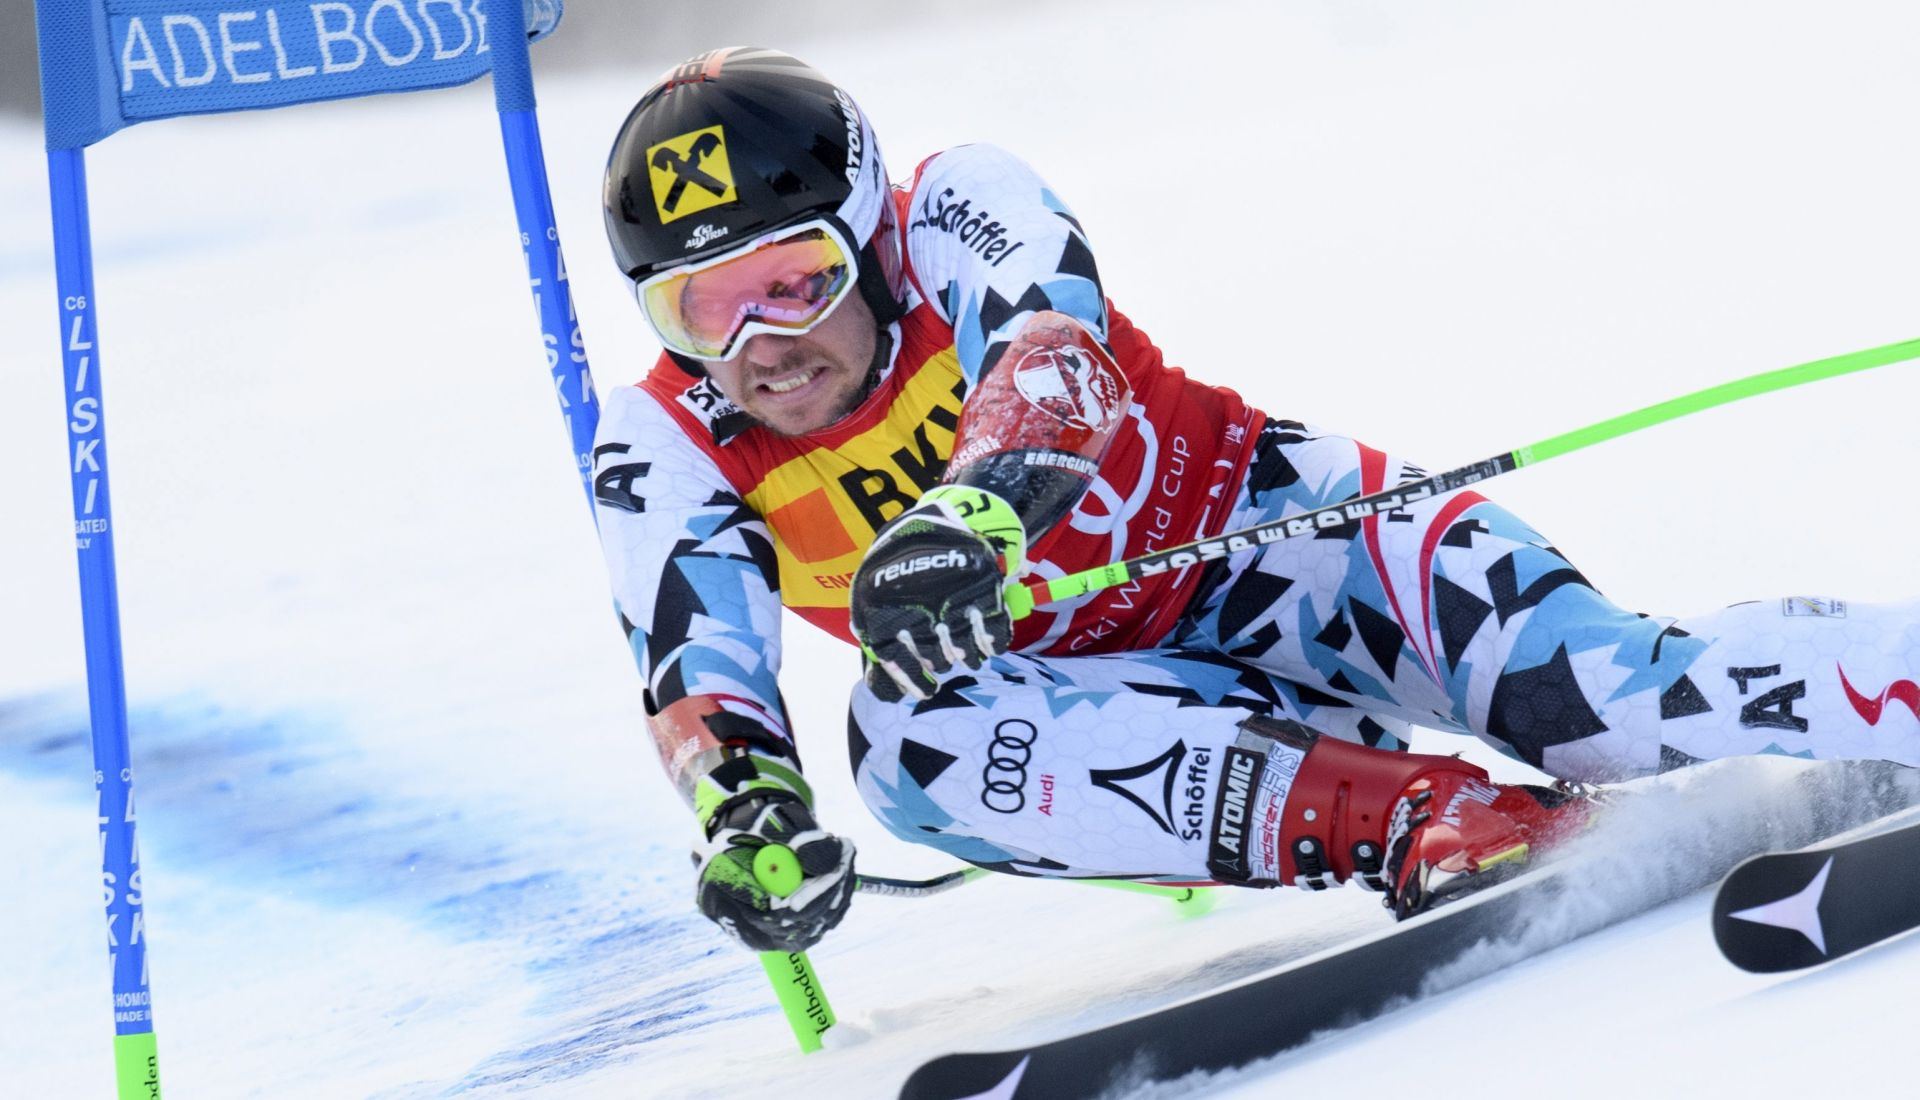 epa05702805 Austria's Marcel Hirscher clears a gate during the first run of the men's Giant Slalom race for the FIS Alpine Skiing World Cup in Adelboden, Switzerland, 07 January 2017.  EPA/JEAN-CHRISTOPHE BOTT